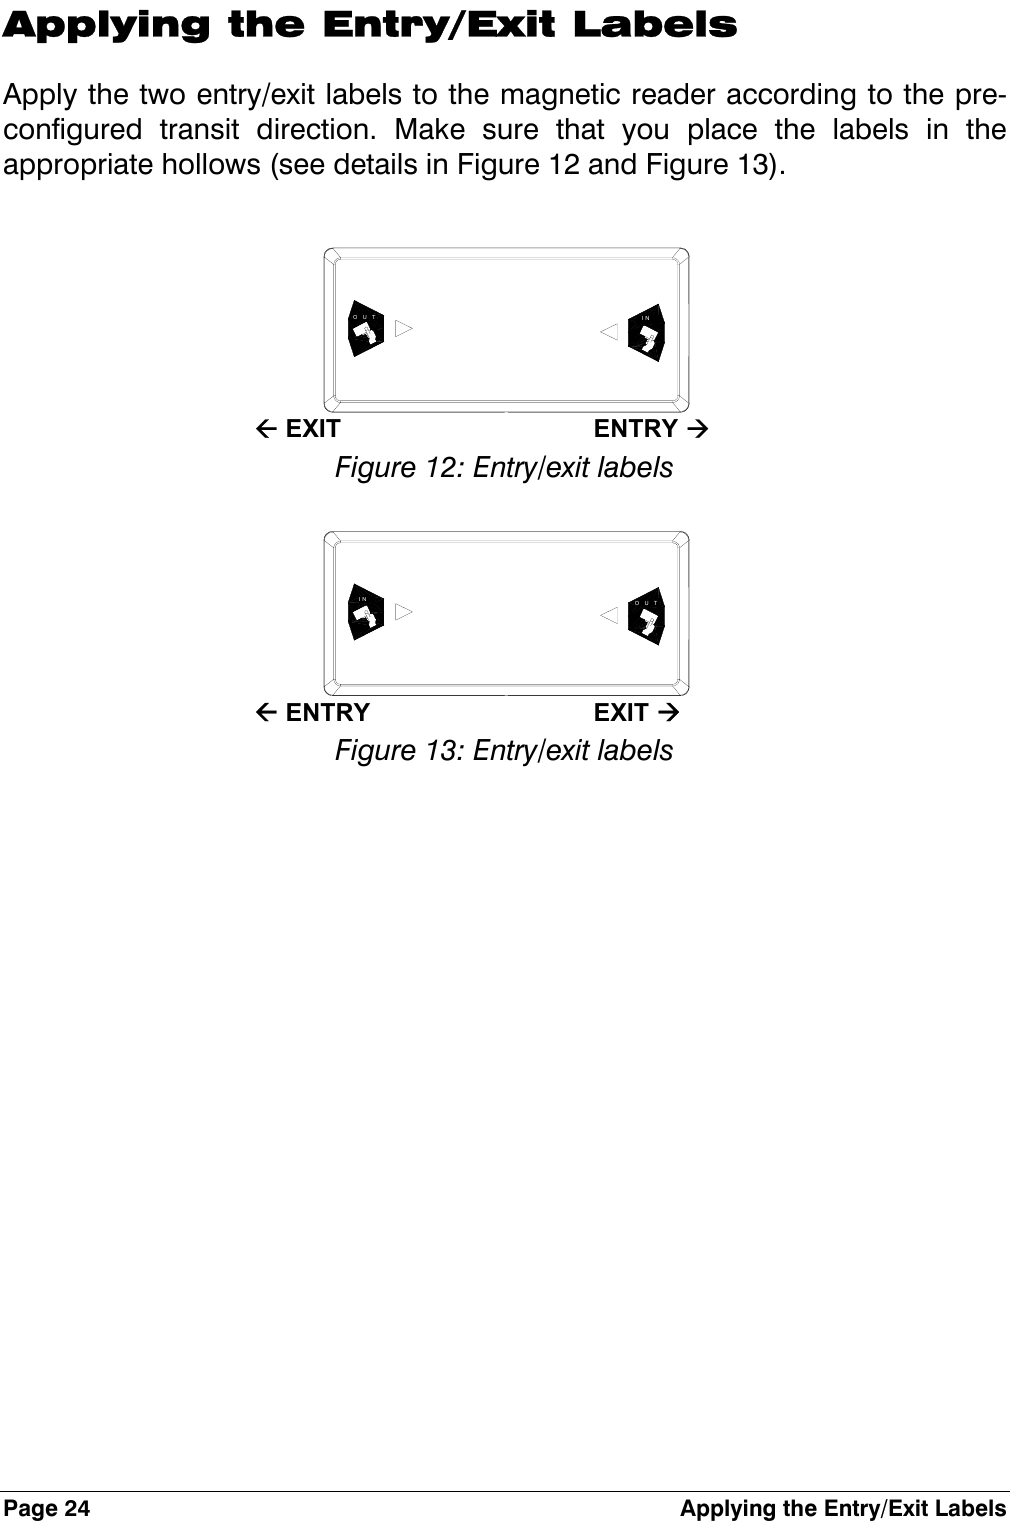 Page 24  Applying the Entry/Exit Labels Applying the Entry/Exit Labels Apply the two entry/exit labels to the magnetic reader according to the pre-configured transit direction. Make sure that you place the labels in the appropriate hollows (see details in Figure 12 and Figure 13).   INOUT  Å EXIT  ENTRY Æ Figure 12: Entry/exit labels  OUTIN  Å ENTRY  EXIT Æ Figure 13: Entry/exit labels 